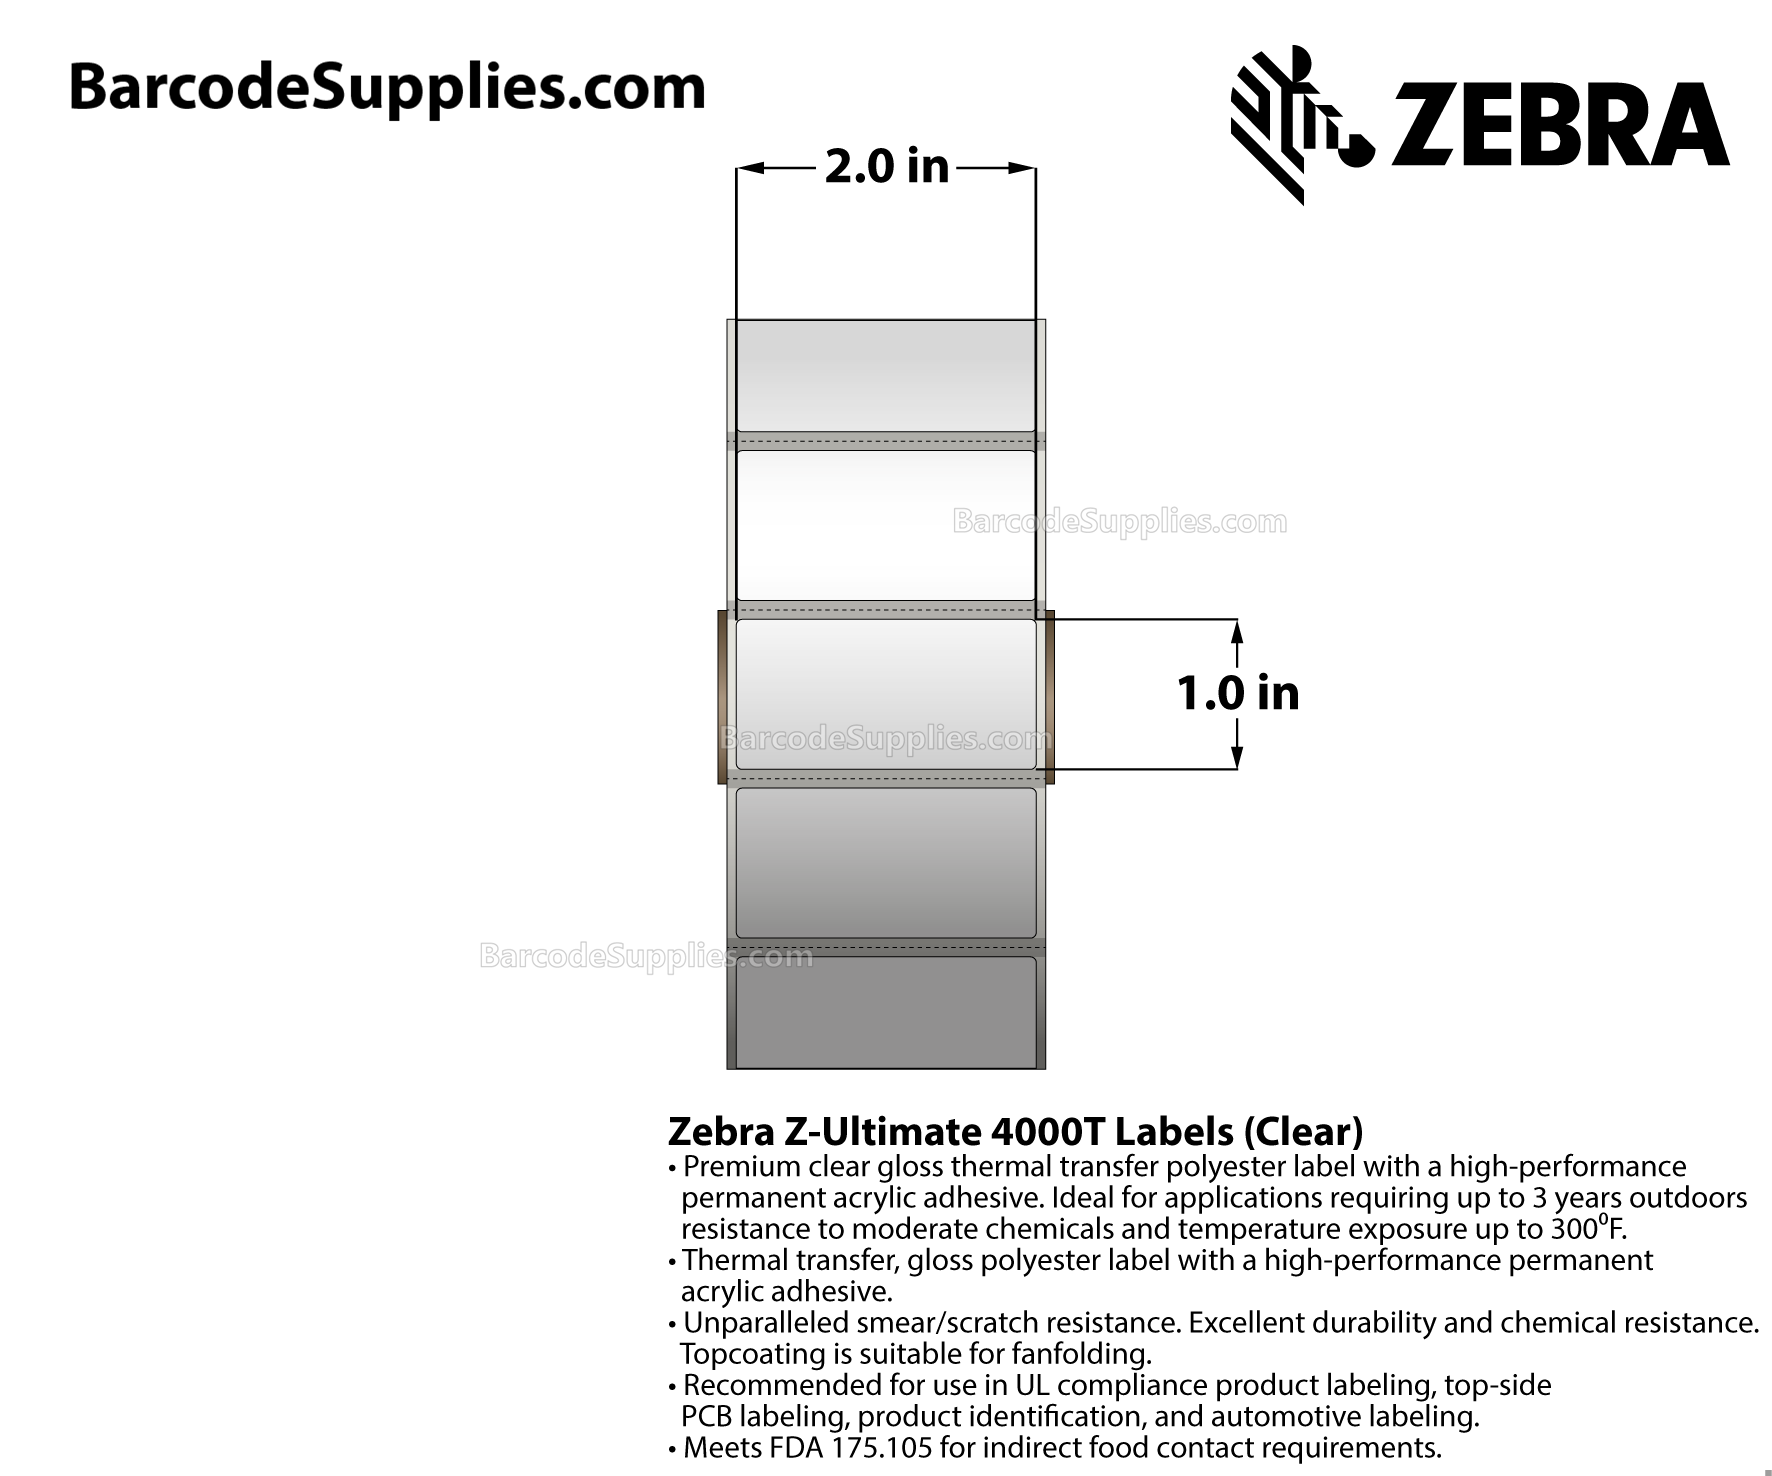 2 x 1 Thermal Transfer Clear Z-Ultimate 4000T Clear Labels With Permanent Adhesive - Black mark sensing - Black Mark - 1500 Labels Per Roll - Carton Of 1 Rolls - 1500 Labels Total - MPN: 10023044